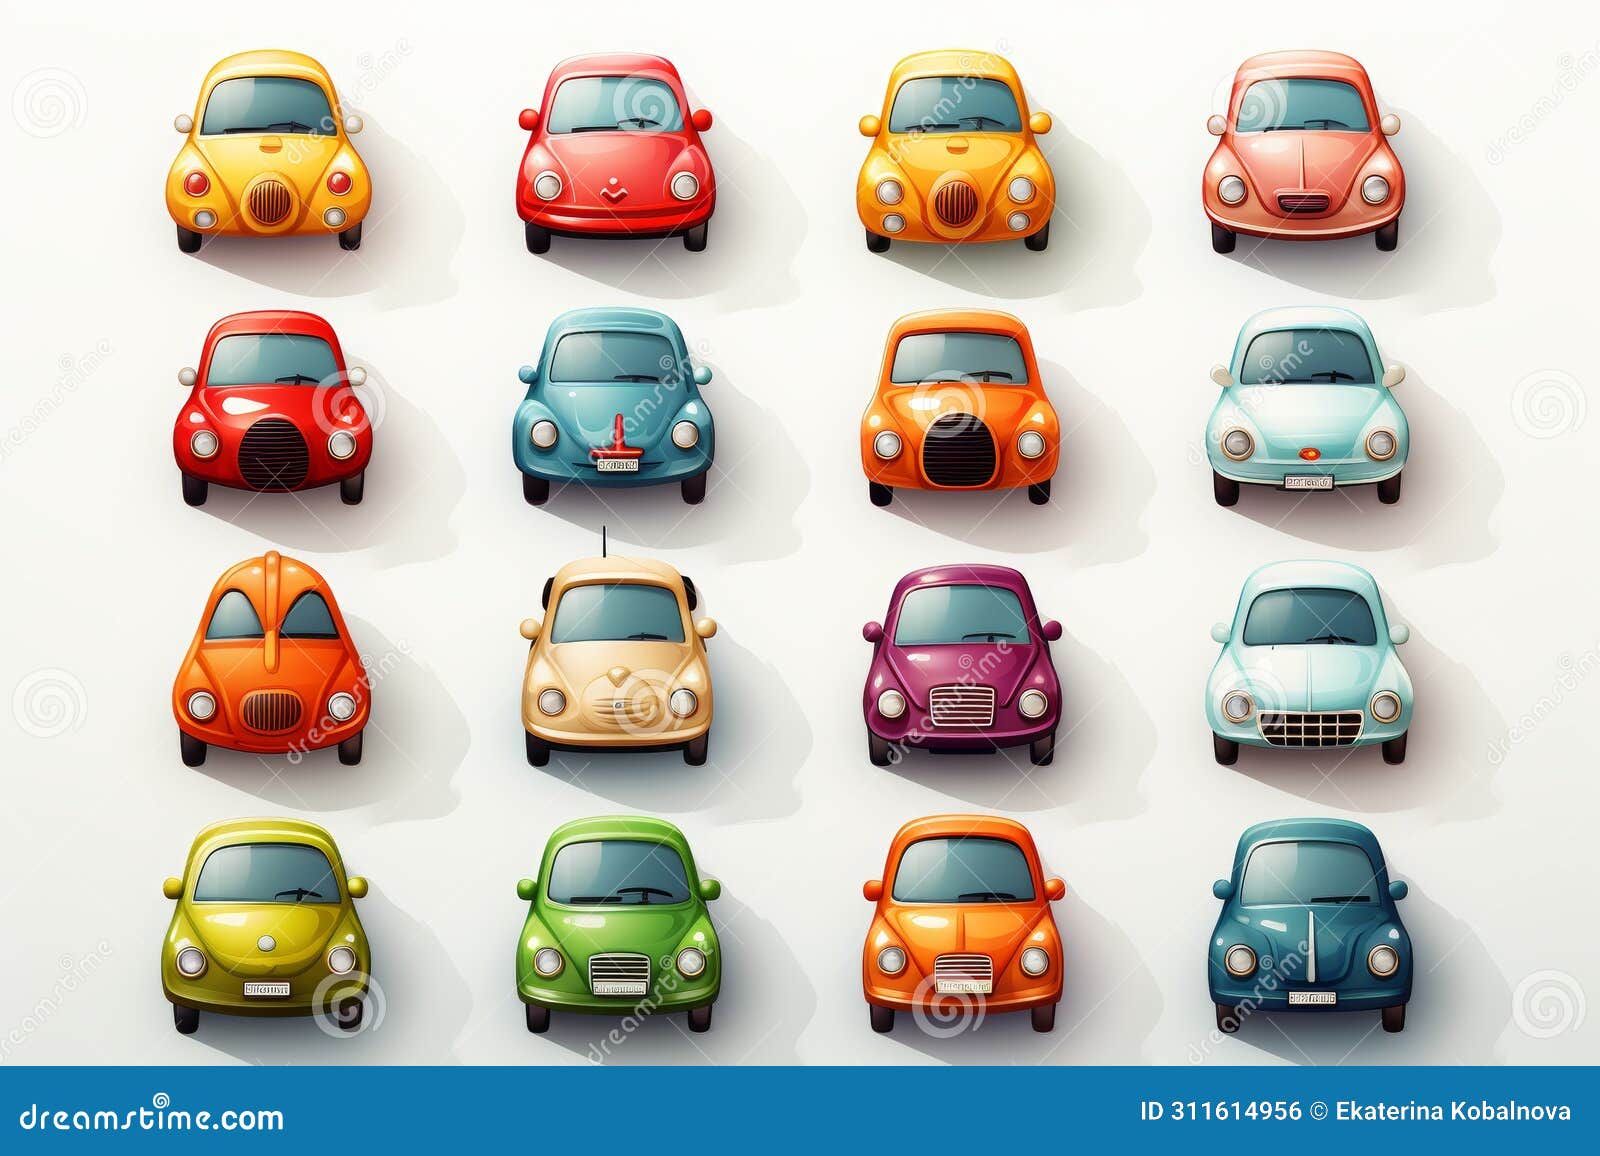 assortment of vibrant and colorful toy car icons on a clean white background available for purchase